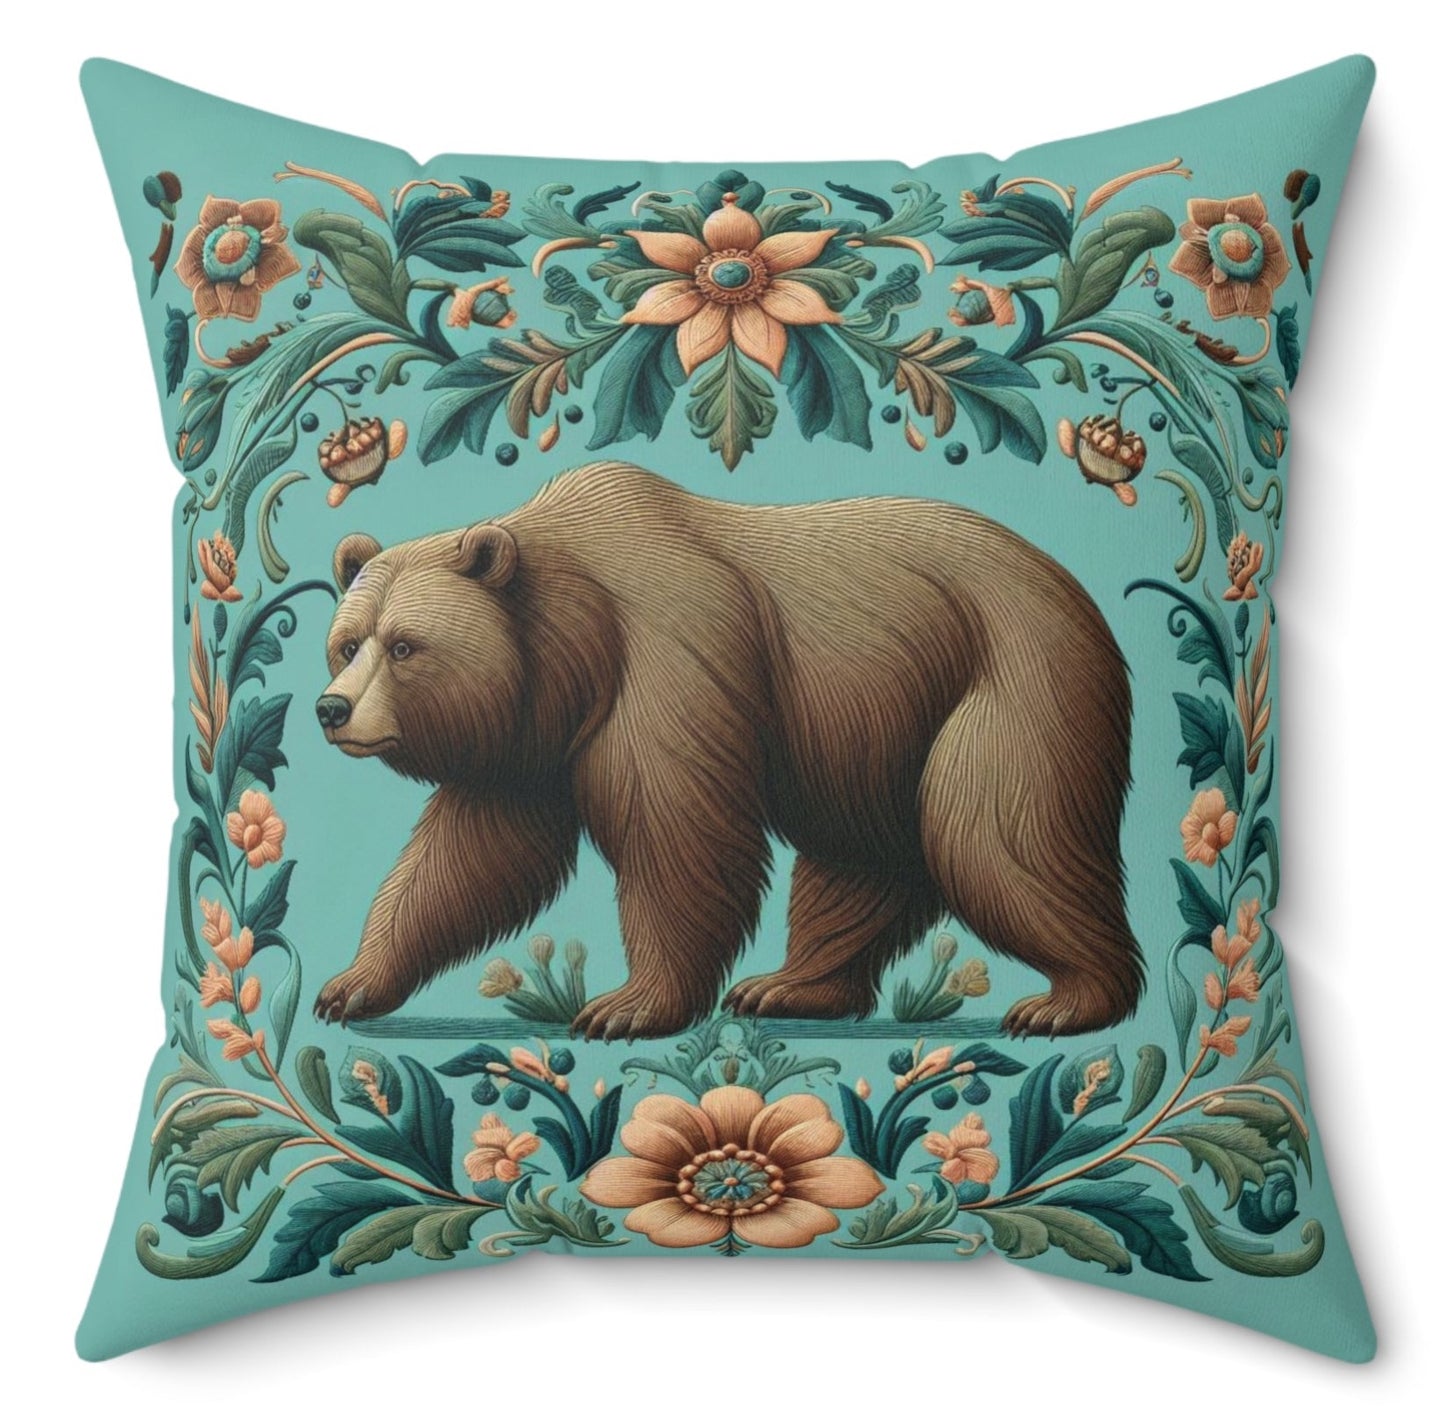 Floral Brown Bear Turquoise Vintage Style Throw Pillow Maximalist Polyester Cover Decorative Cushion Square 